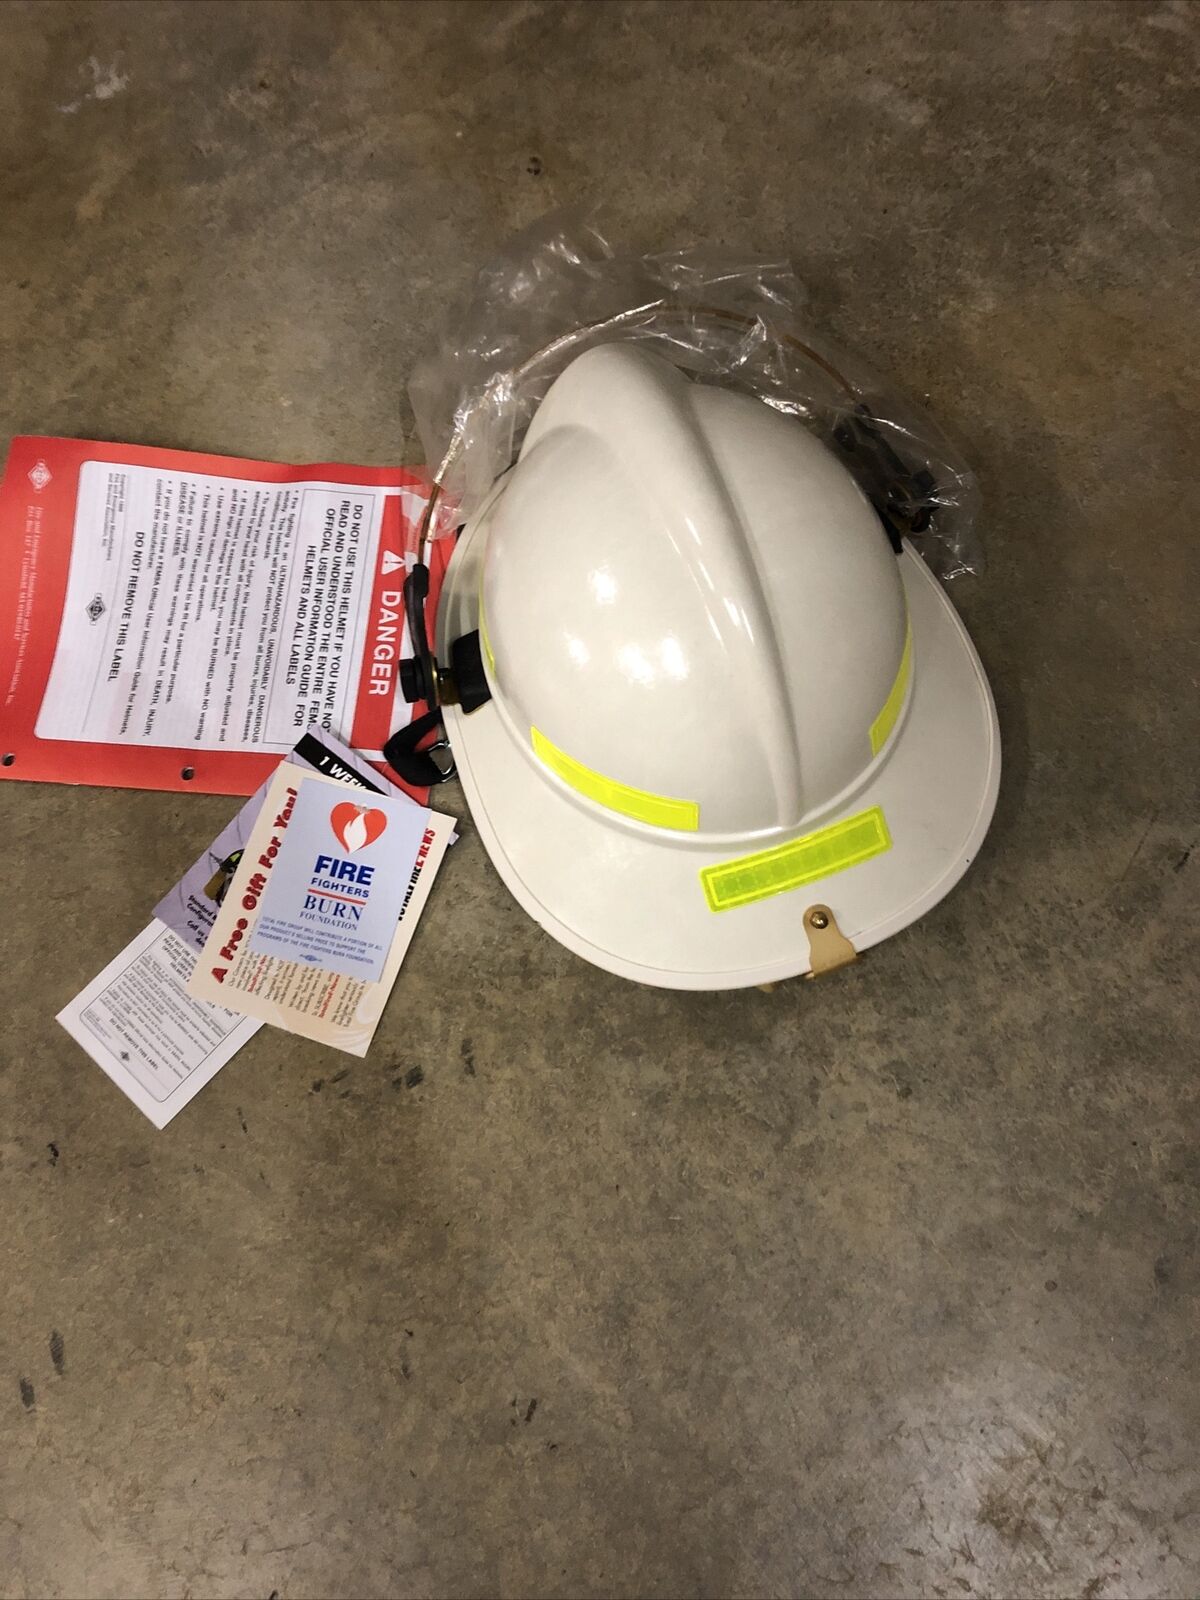 HONEYWELL MORNING PRIDE LITE FORCE PLUS Fire Helmet White Brand NEW With TAGS